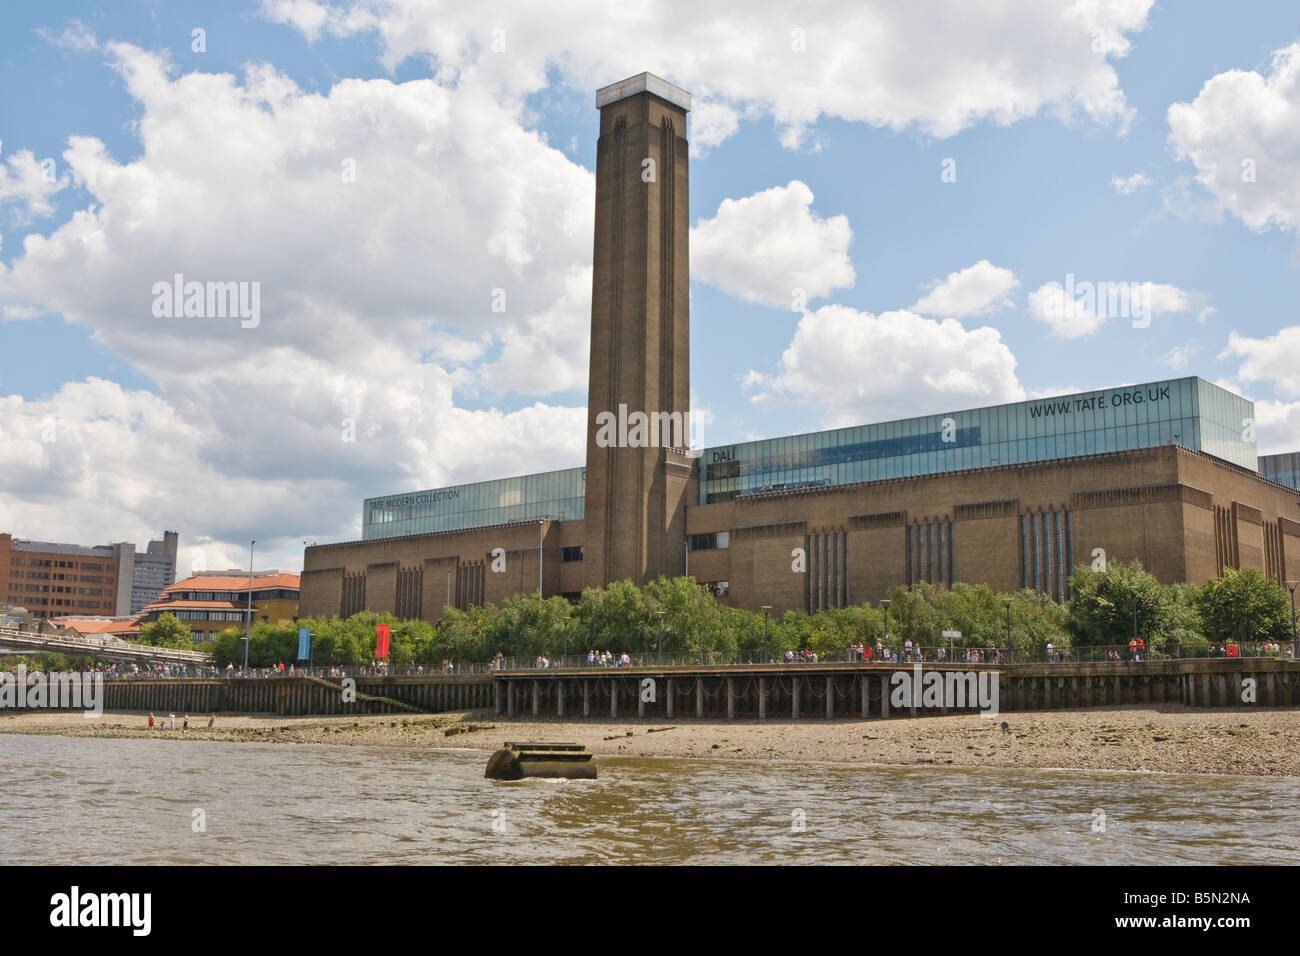 The Tate Modern in London as seen from The River Thames Stock Photo